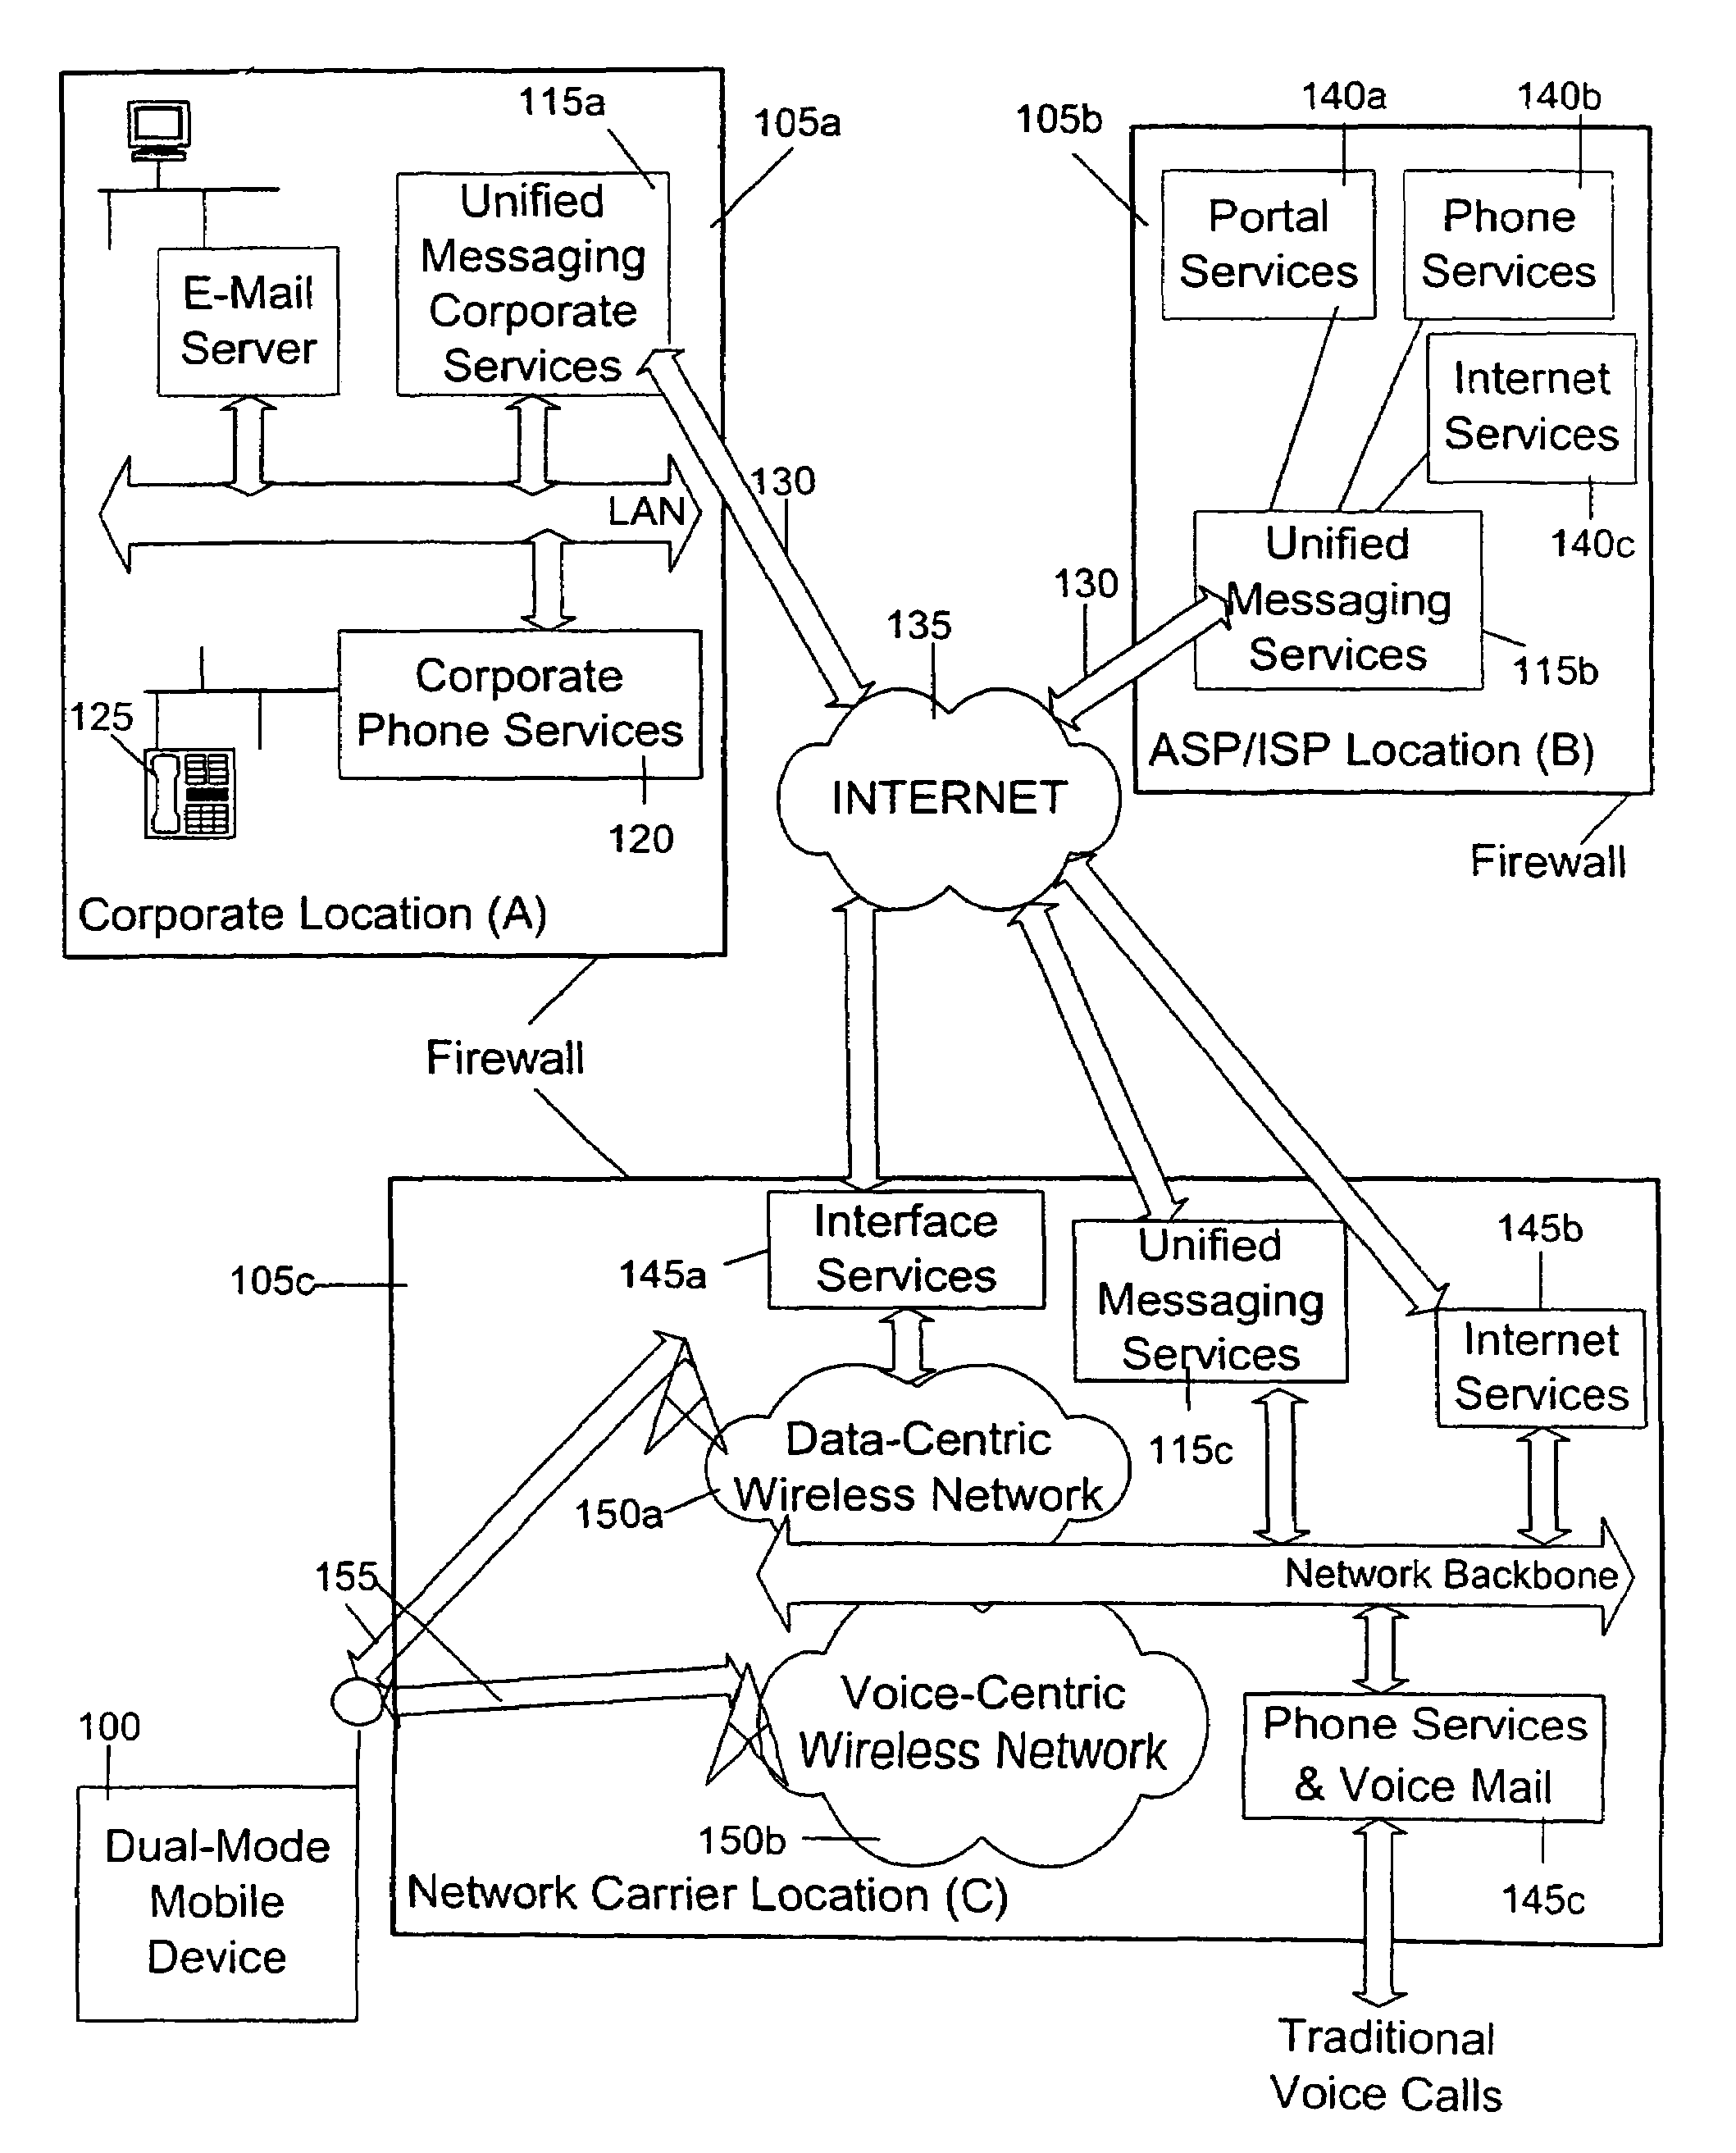 System, method and mobile device for remote control of a voice mail system